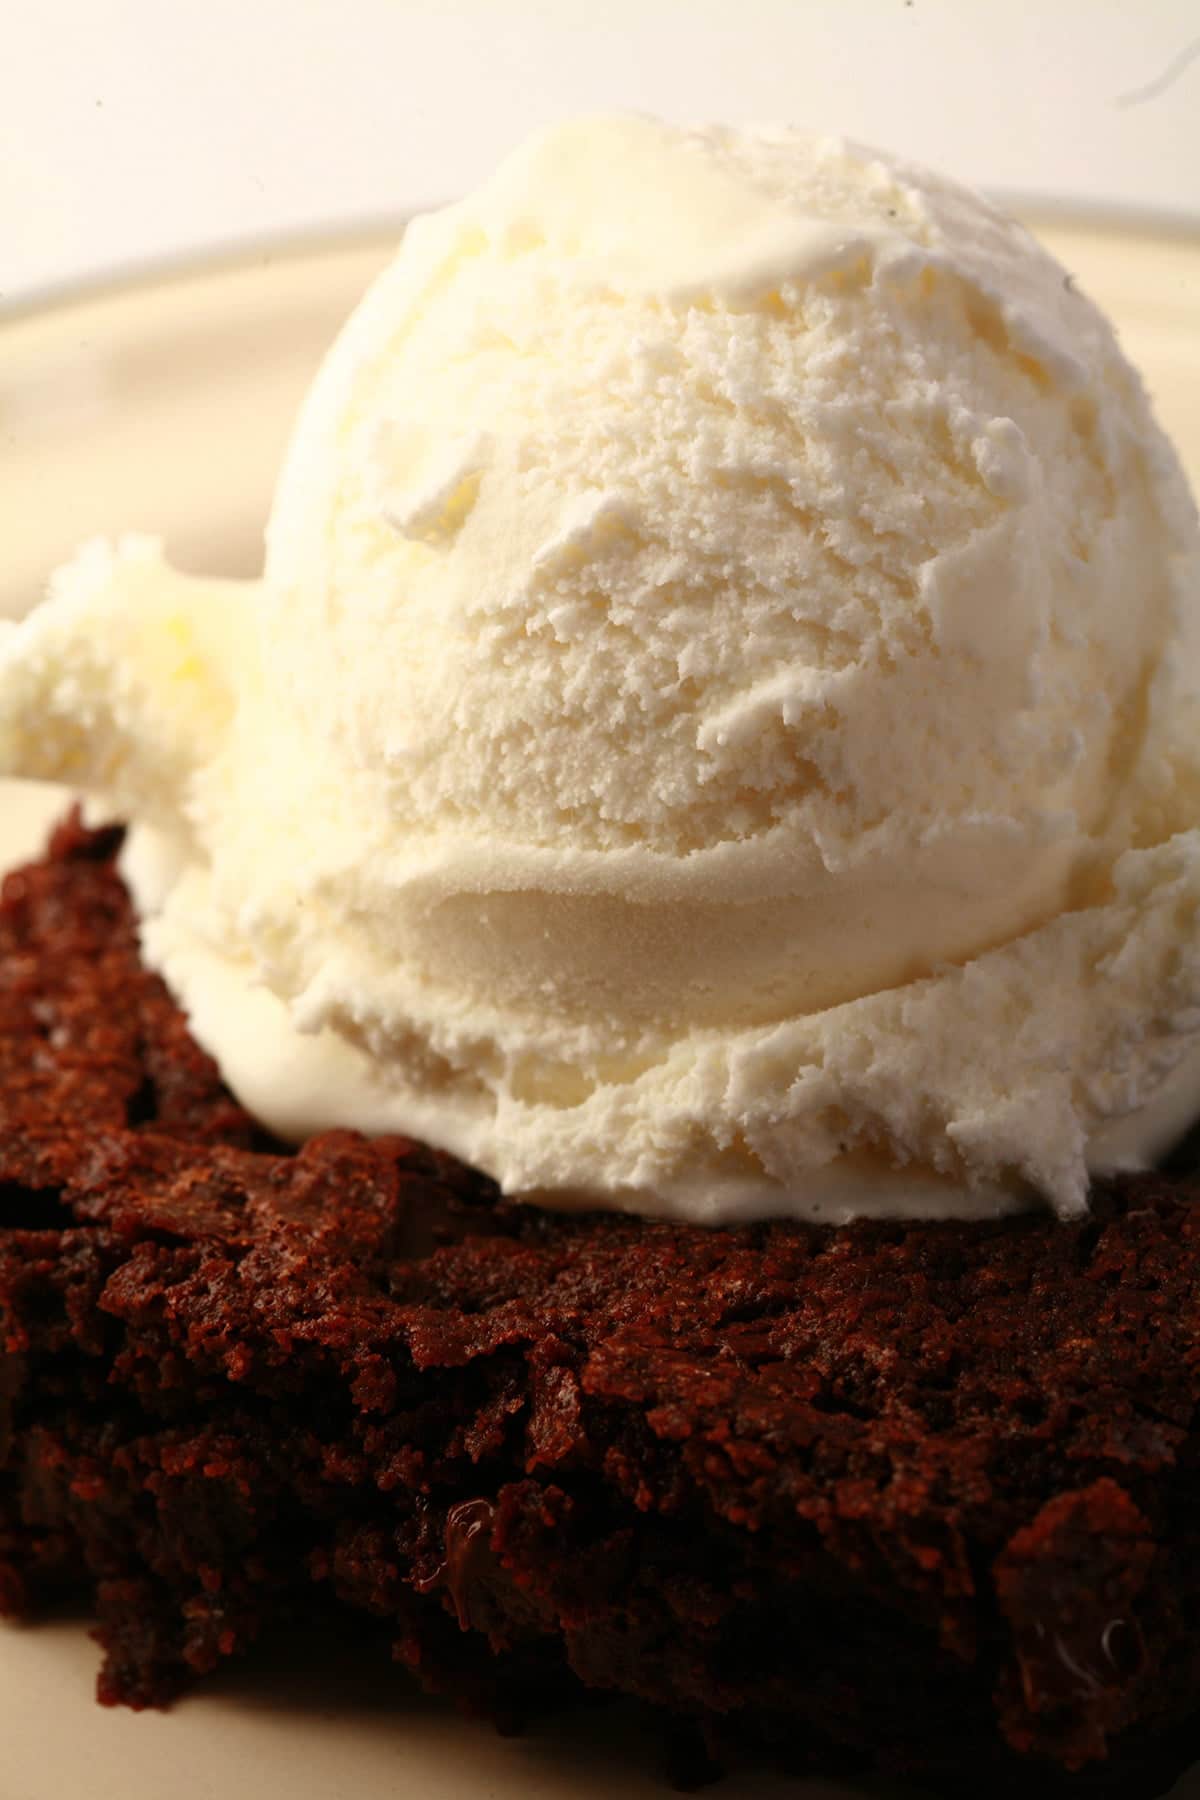 A large double chocolate brownie, topped with vanilla ice cream.